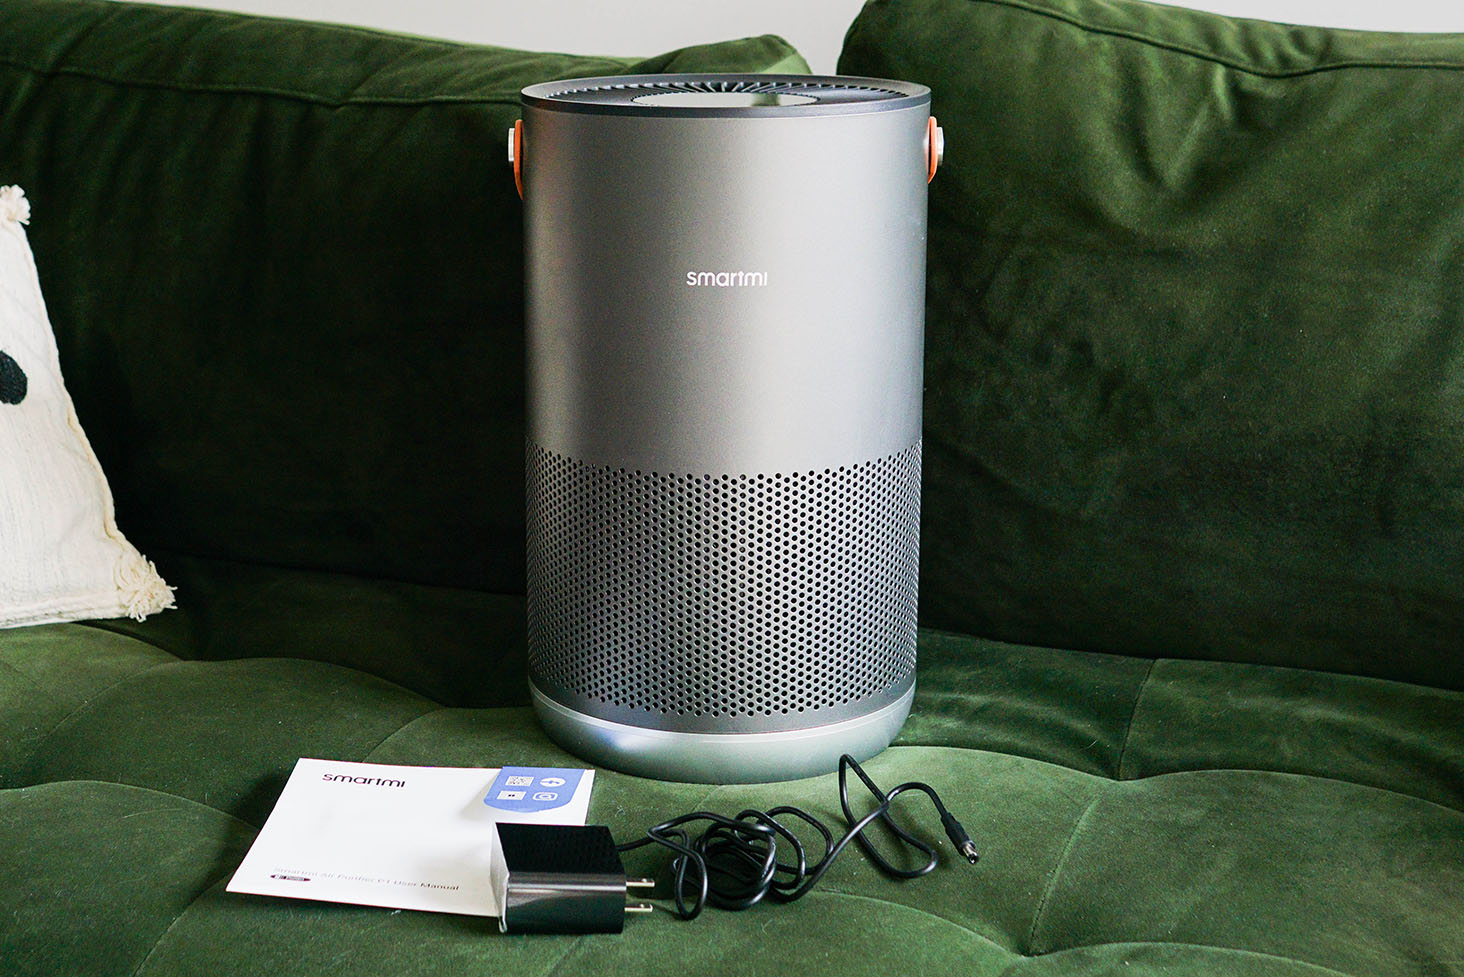 What's in the box of the smartmi p1 air purifier